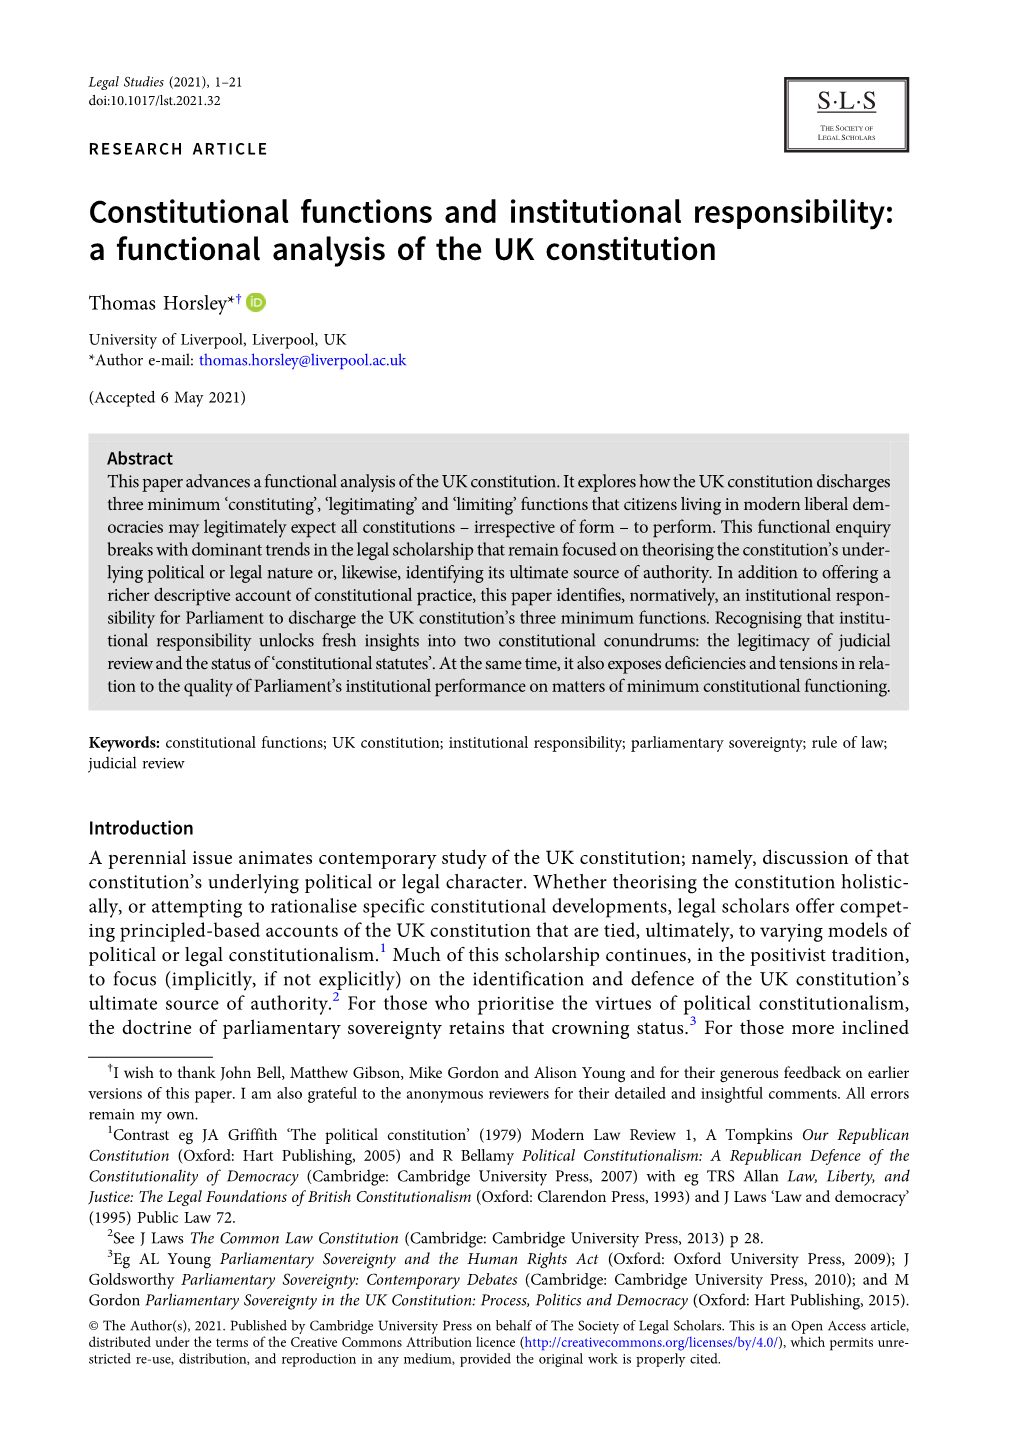 Constitutional Functions and Institutional Responsibility: a Functional Analysis of the UK Constitution